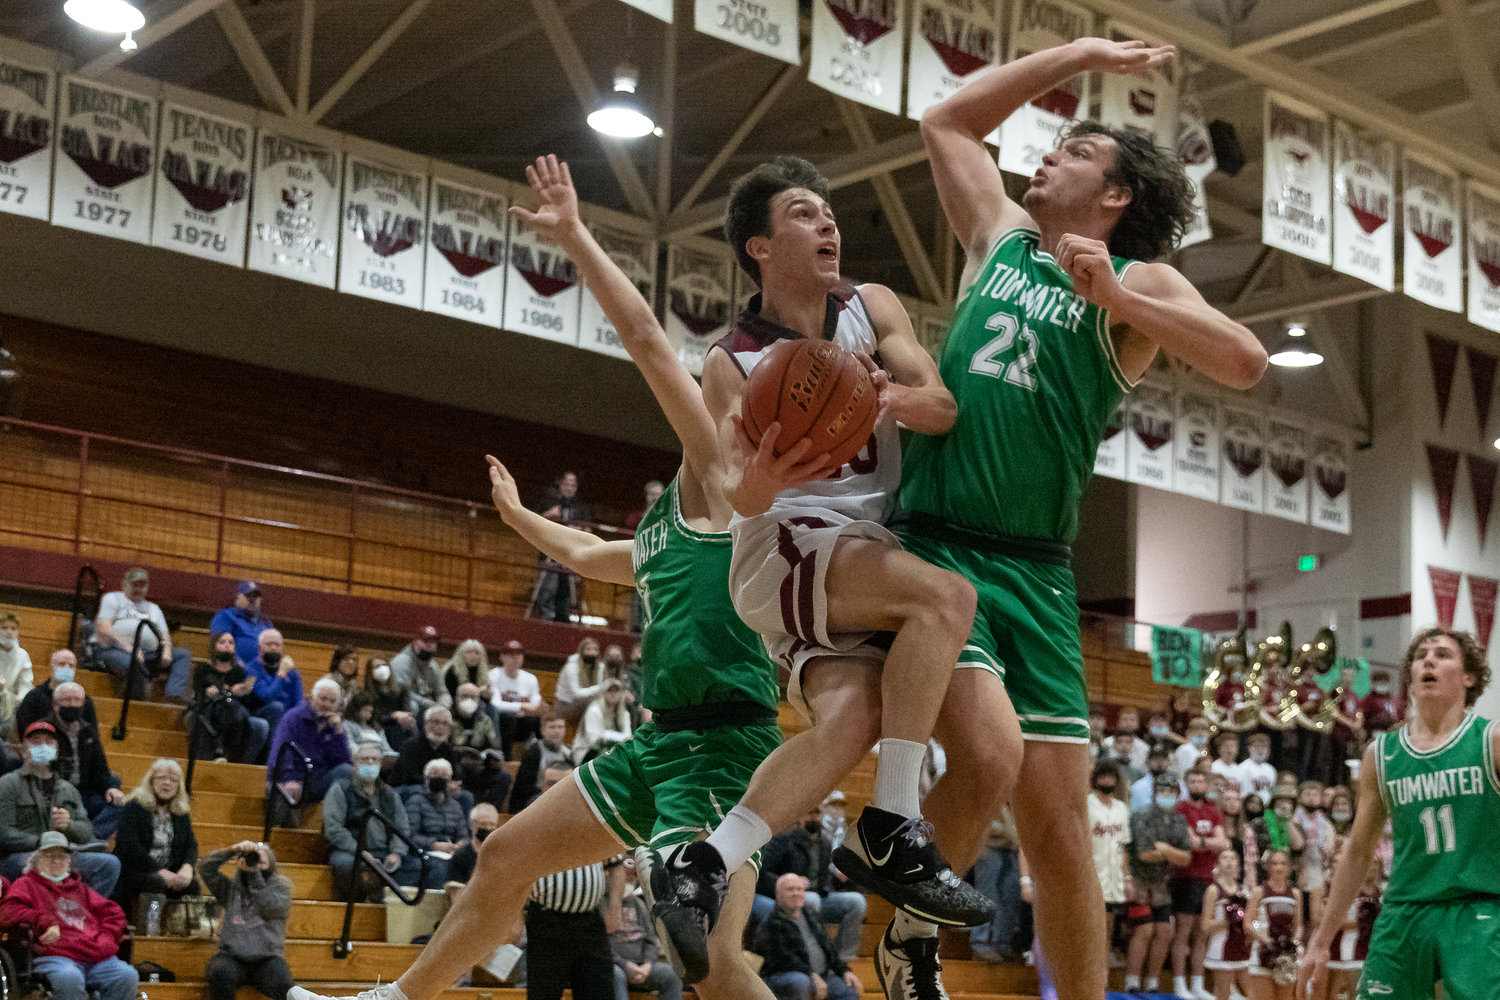 W.F. West guard Seth Hoff is fouled by Tumwater's Ryan Otton on a drive attempt Jan. 25.